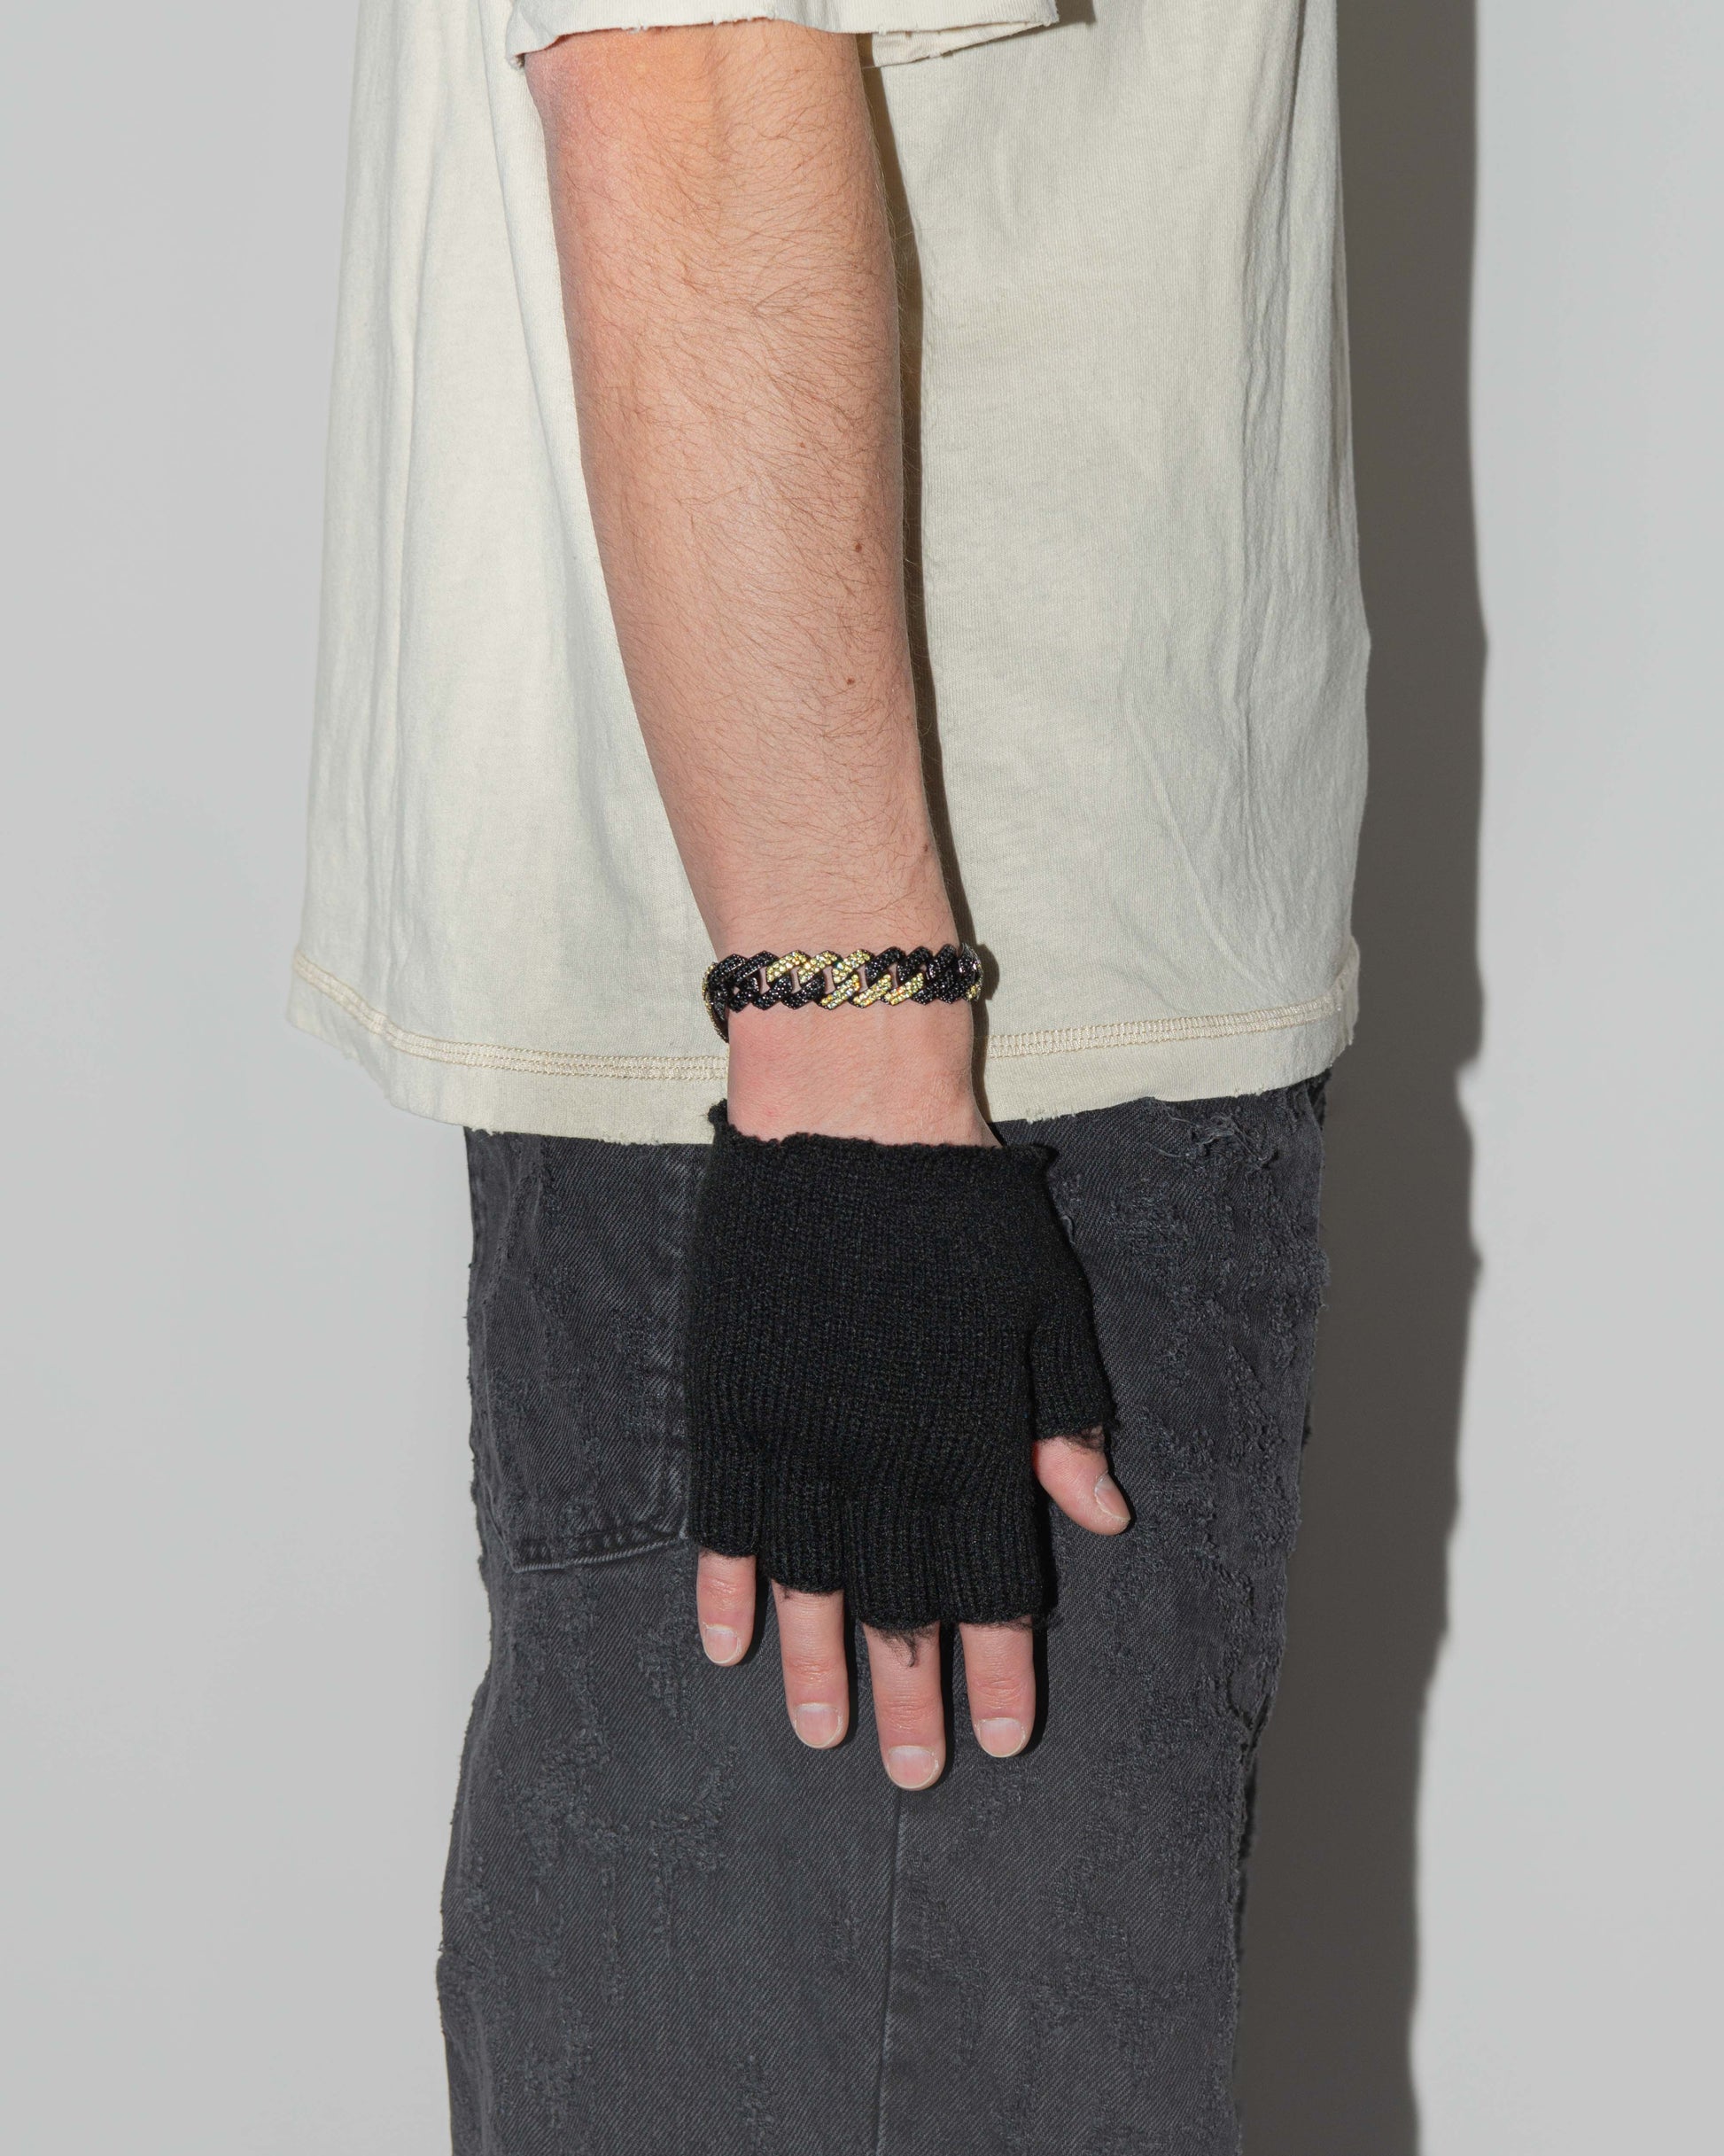 man wearing danger prong chain bracelet with deep black PVD coating and hand-set micropavé stones in black and lemon yellow